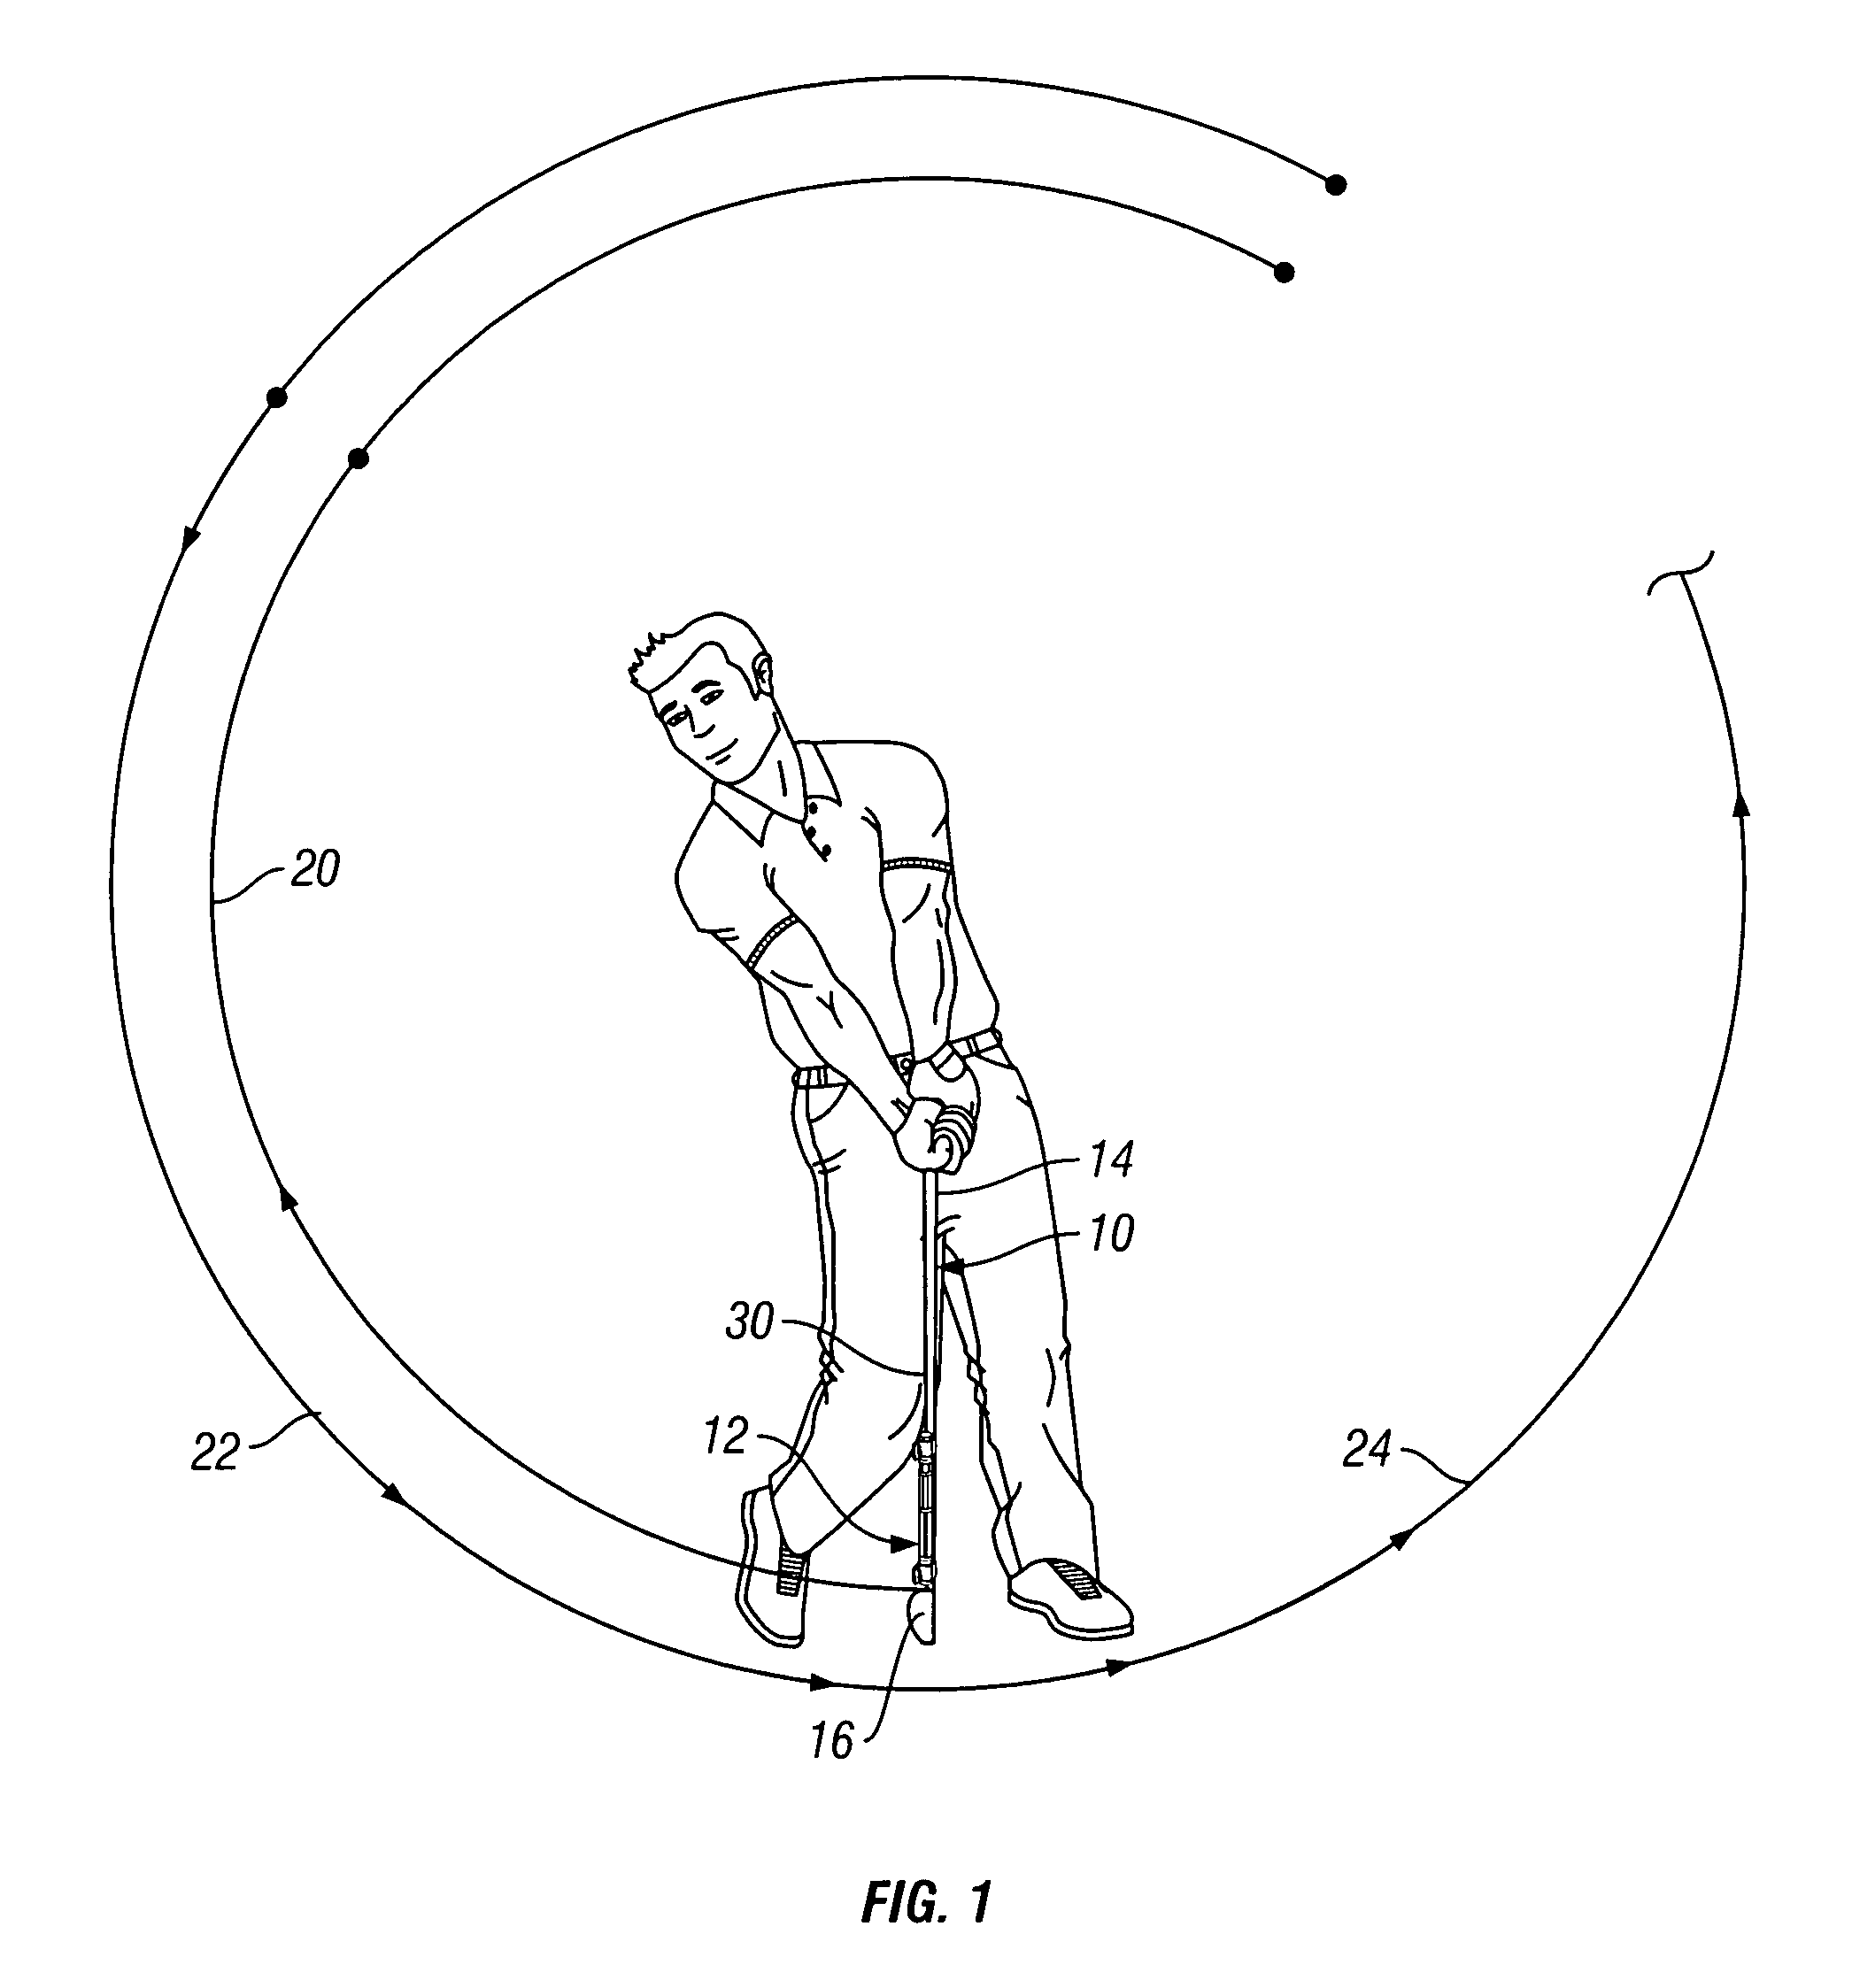 Apparatus for generating a complex acoustic profile representing the acceleration pattern of an object moving through a path of travel